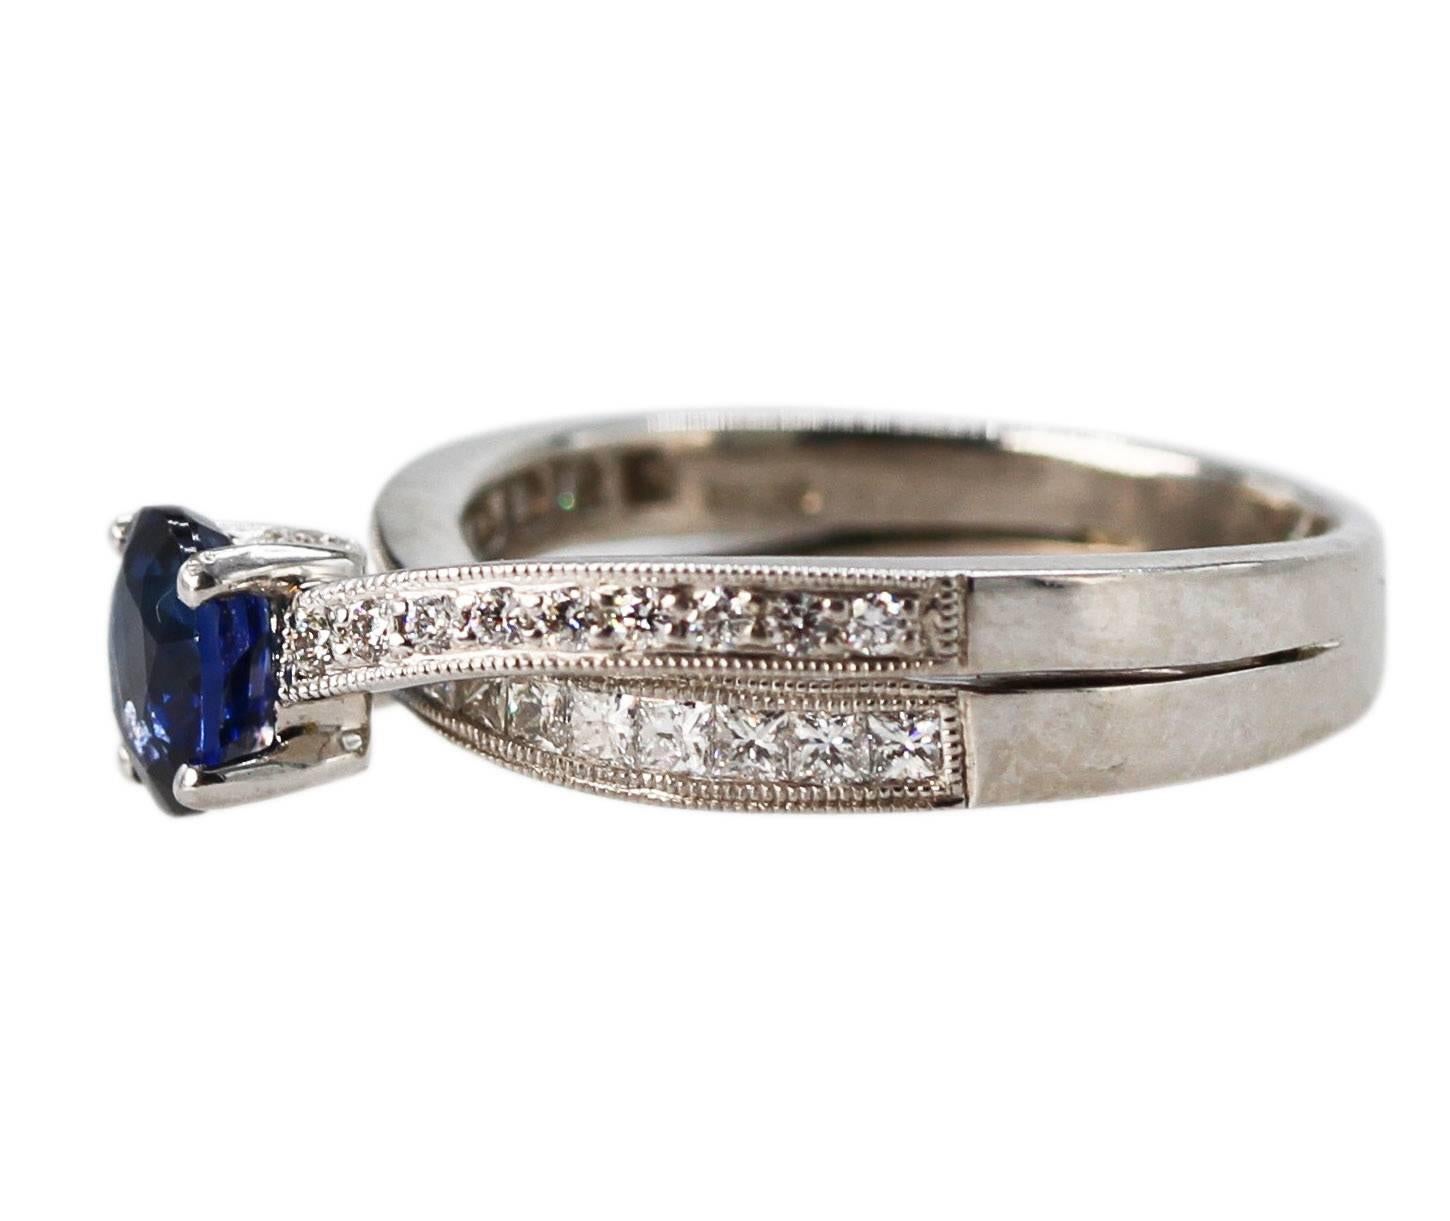 Platinum, Sapphire and Diamond Ring
• Stamped PT950
• Oval sapphire approximately 0.85 carat
• 22 round diamonds weighing approximately 0.15 carat
• 17 princess-cut diamonds approximately 0.60 carat
• Size 6 1/2, gross weight of 8.4 grams, measuring